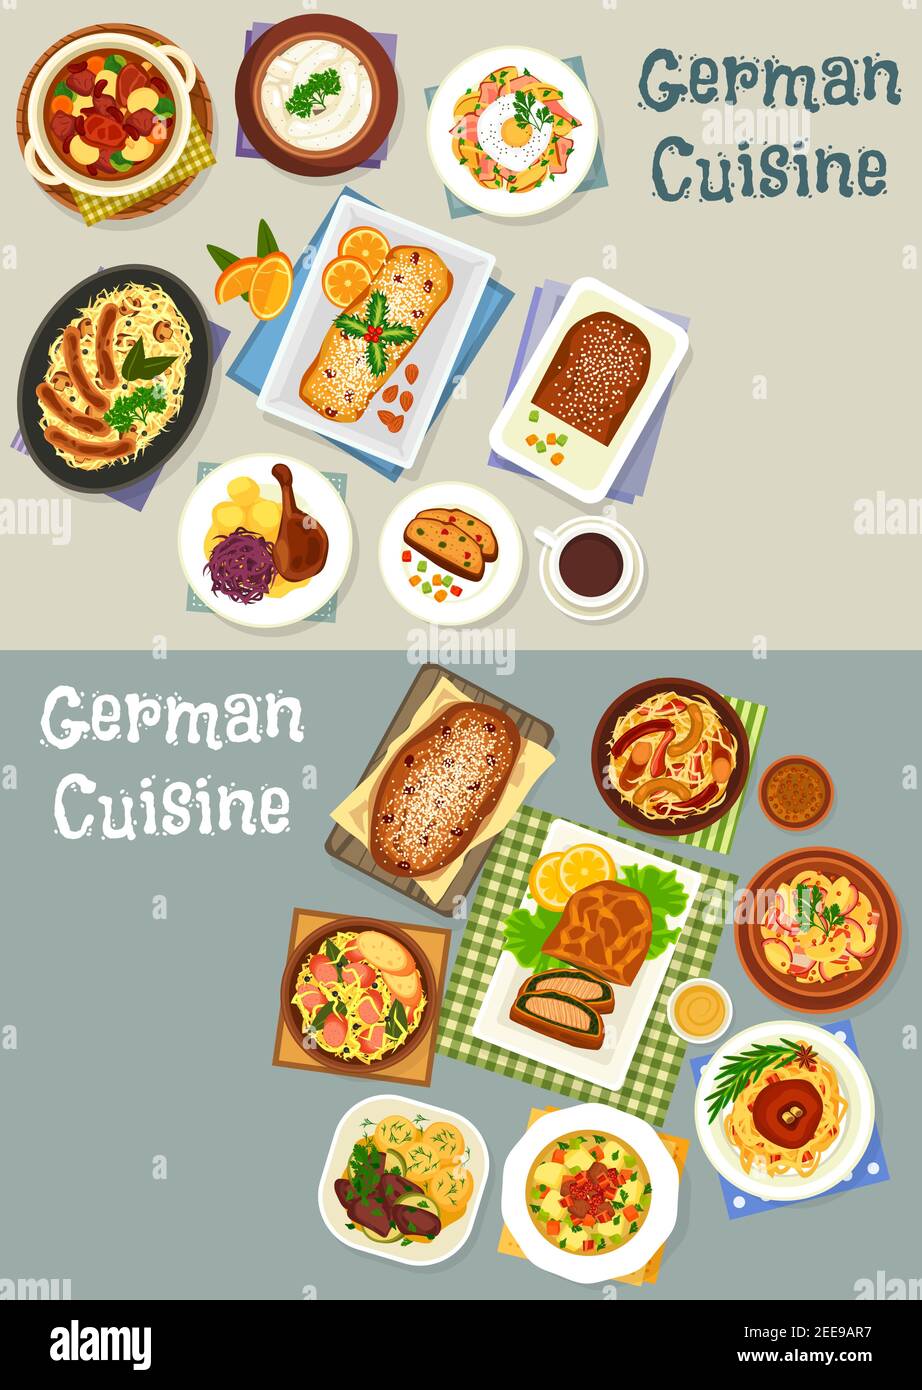 German cuisine festive dinner icon set of cabbage stew with pork sausage, potato bacon salad, baked goose, sweet bread and fruit cake, fish pie, fried Stock Vector